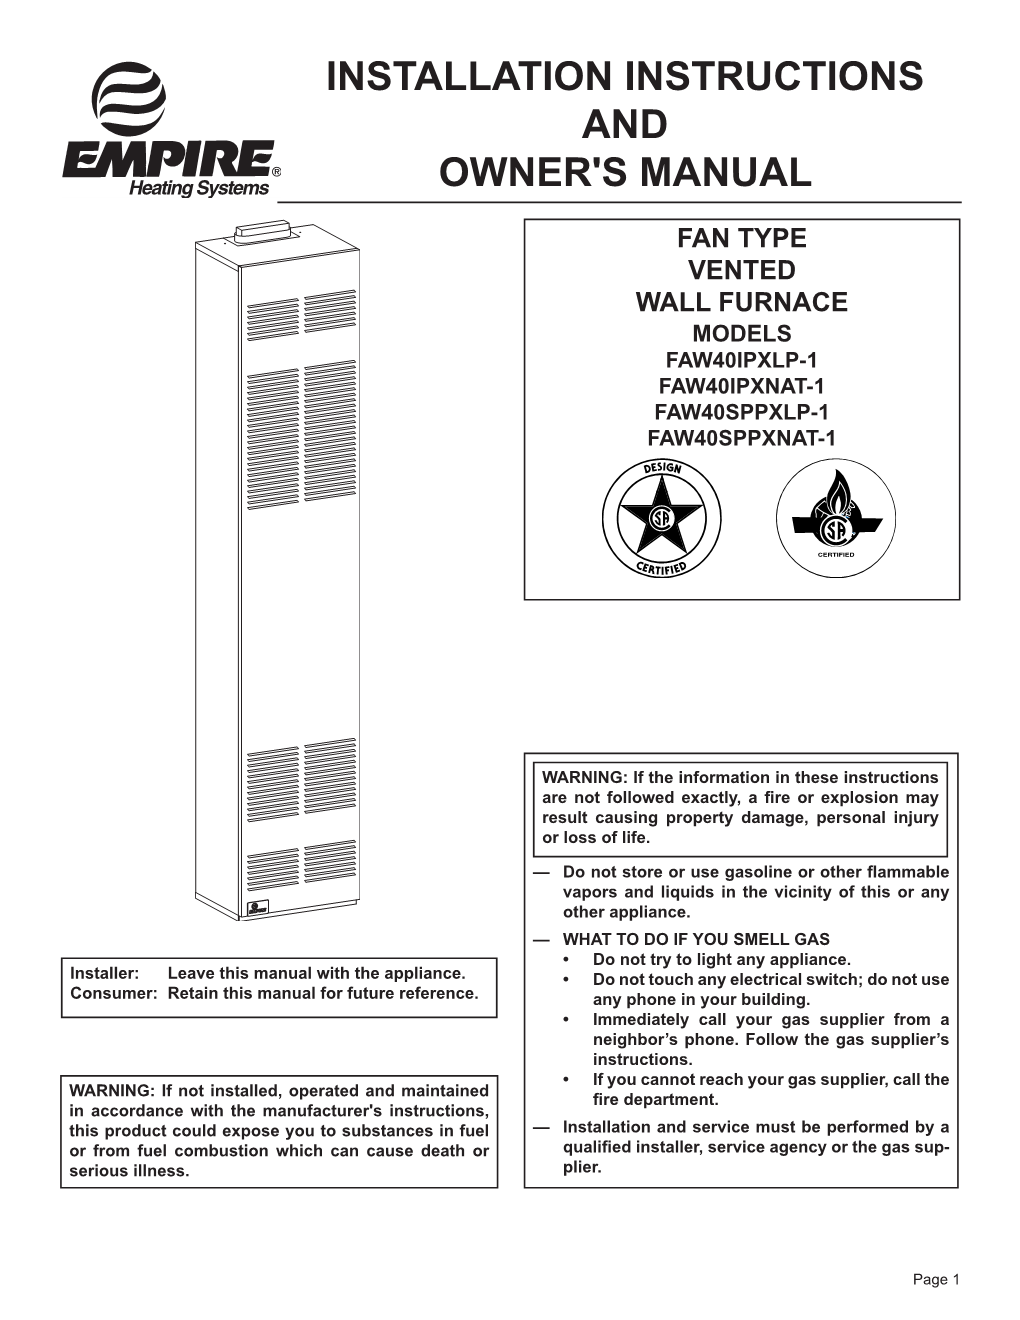 Installation Instructions and Owner's Manual